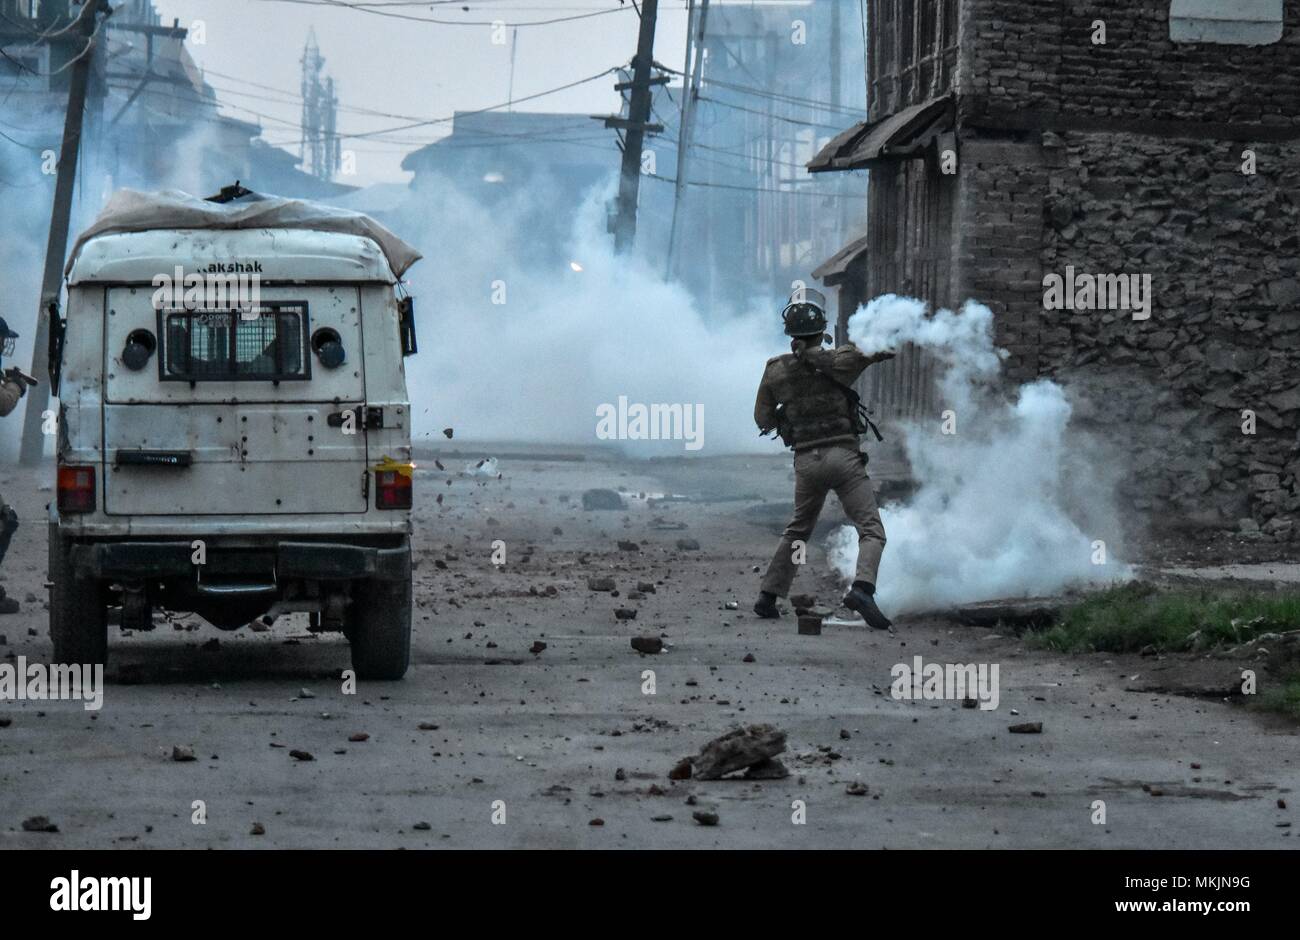 Srinagar, Kashmir. 8th May 2018. An policeman throws a tear gas canister back towards Kashmiri protesters during clashes in Srinagar, Kashmir. Fierce clashes broke out between government forces and Kashmiri protesters in Srinagar on Tuesday as the valley continued to remain tense over the killing of 11 people including 5 militants and 6 civilians in Kashmir. Police used tear smoke shells and shot gun pellets to disperse hundreds of demonstrators who hurled rocks and chanted anti-and pro-freedom slogans. Credit: SOPA Images Limited/Alamy Live News Stock Photo